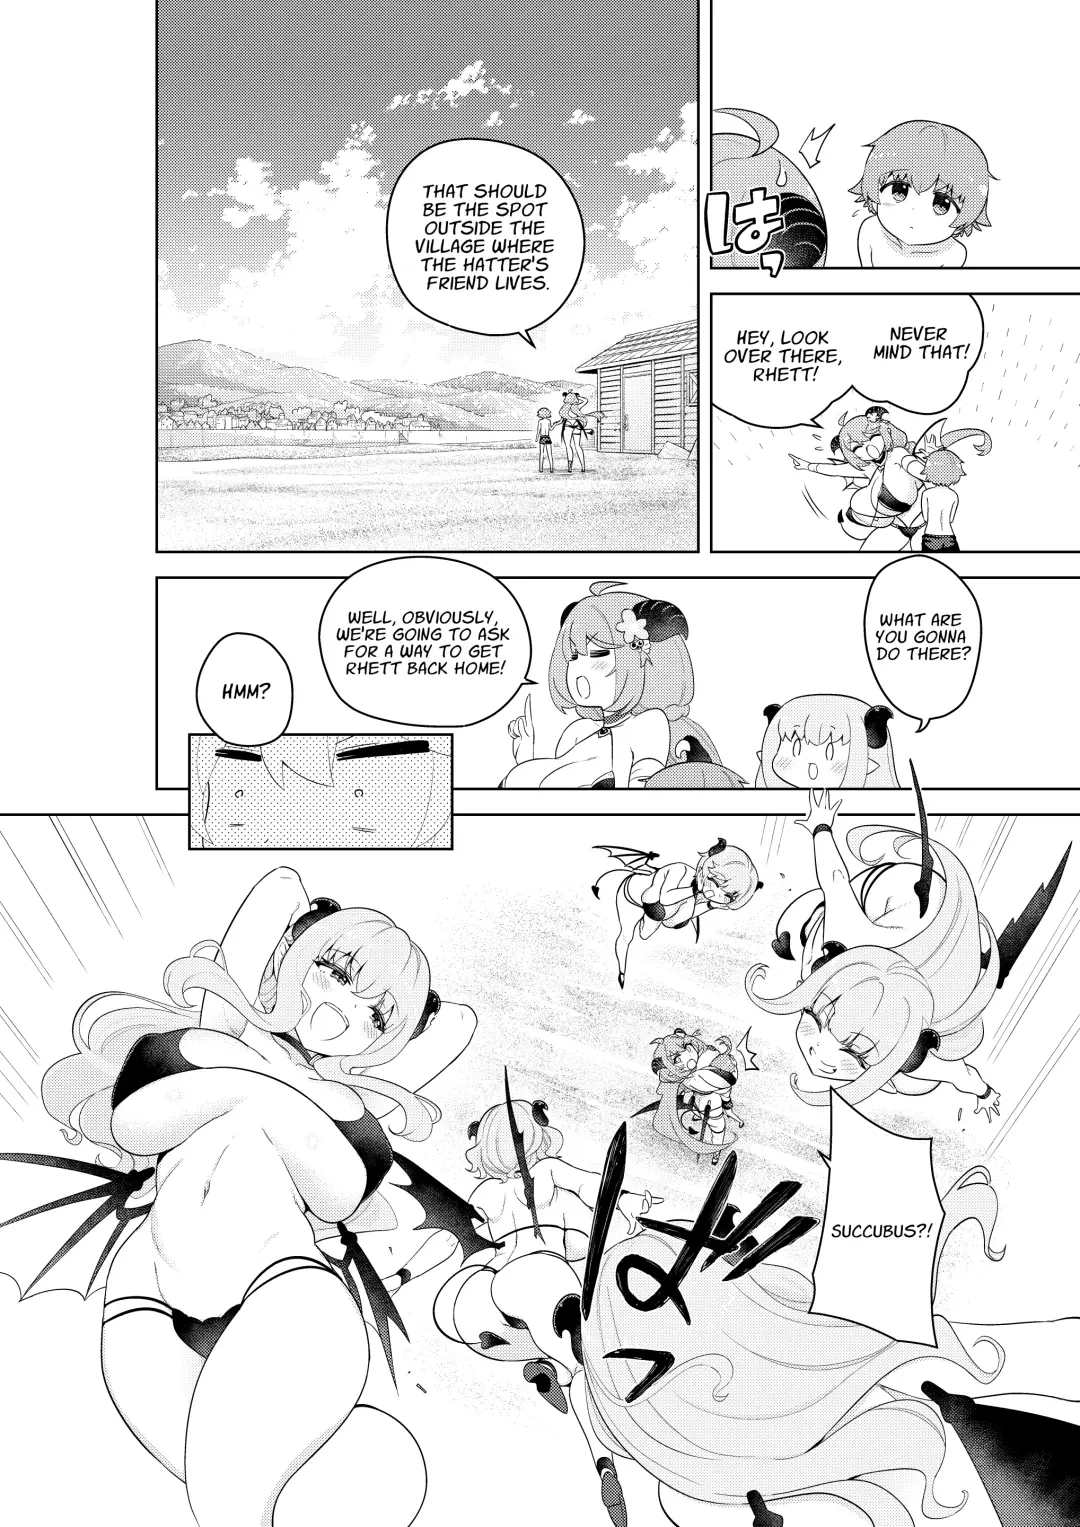 Succubus in Wonderland: Comicalize! Volume 1 Fhentai.net - Page 64